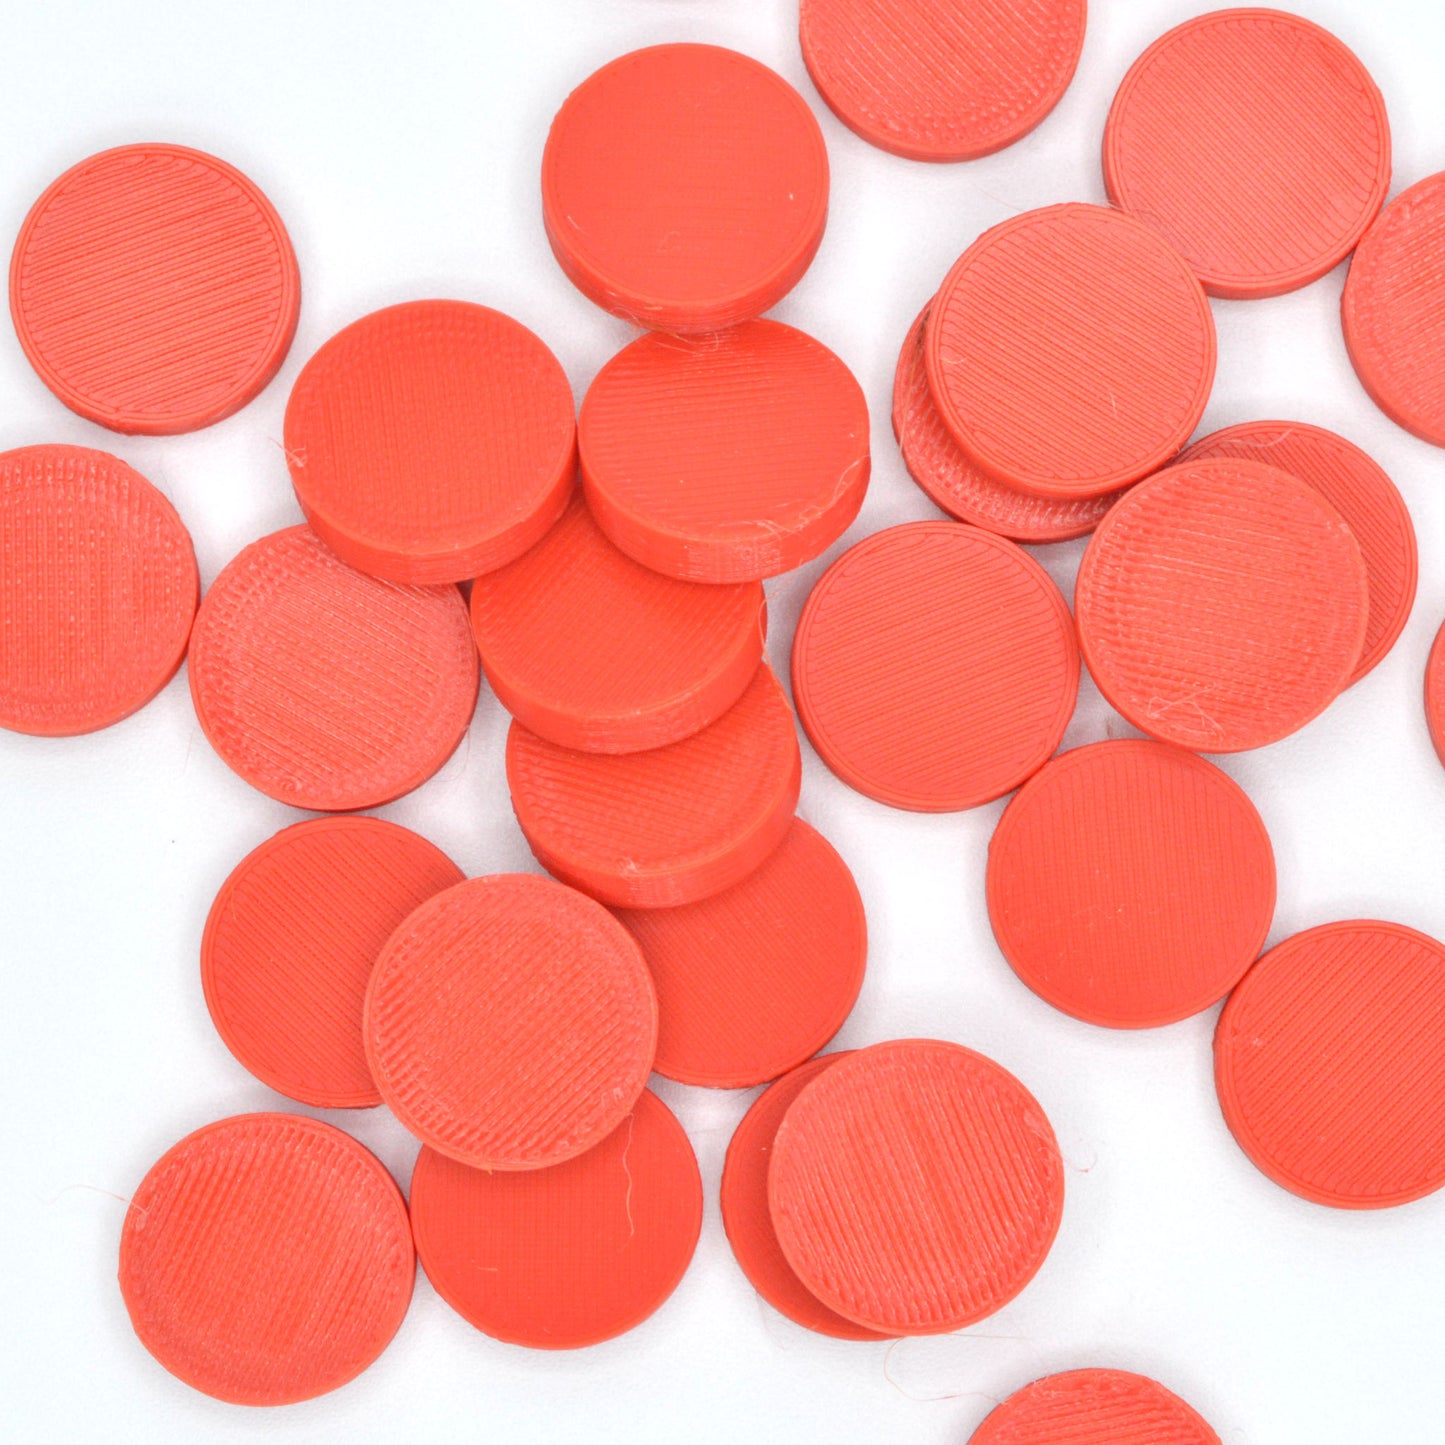 DISC tokens for board games